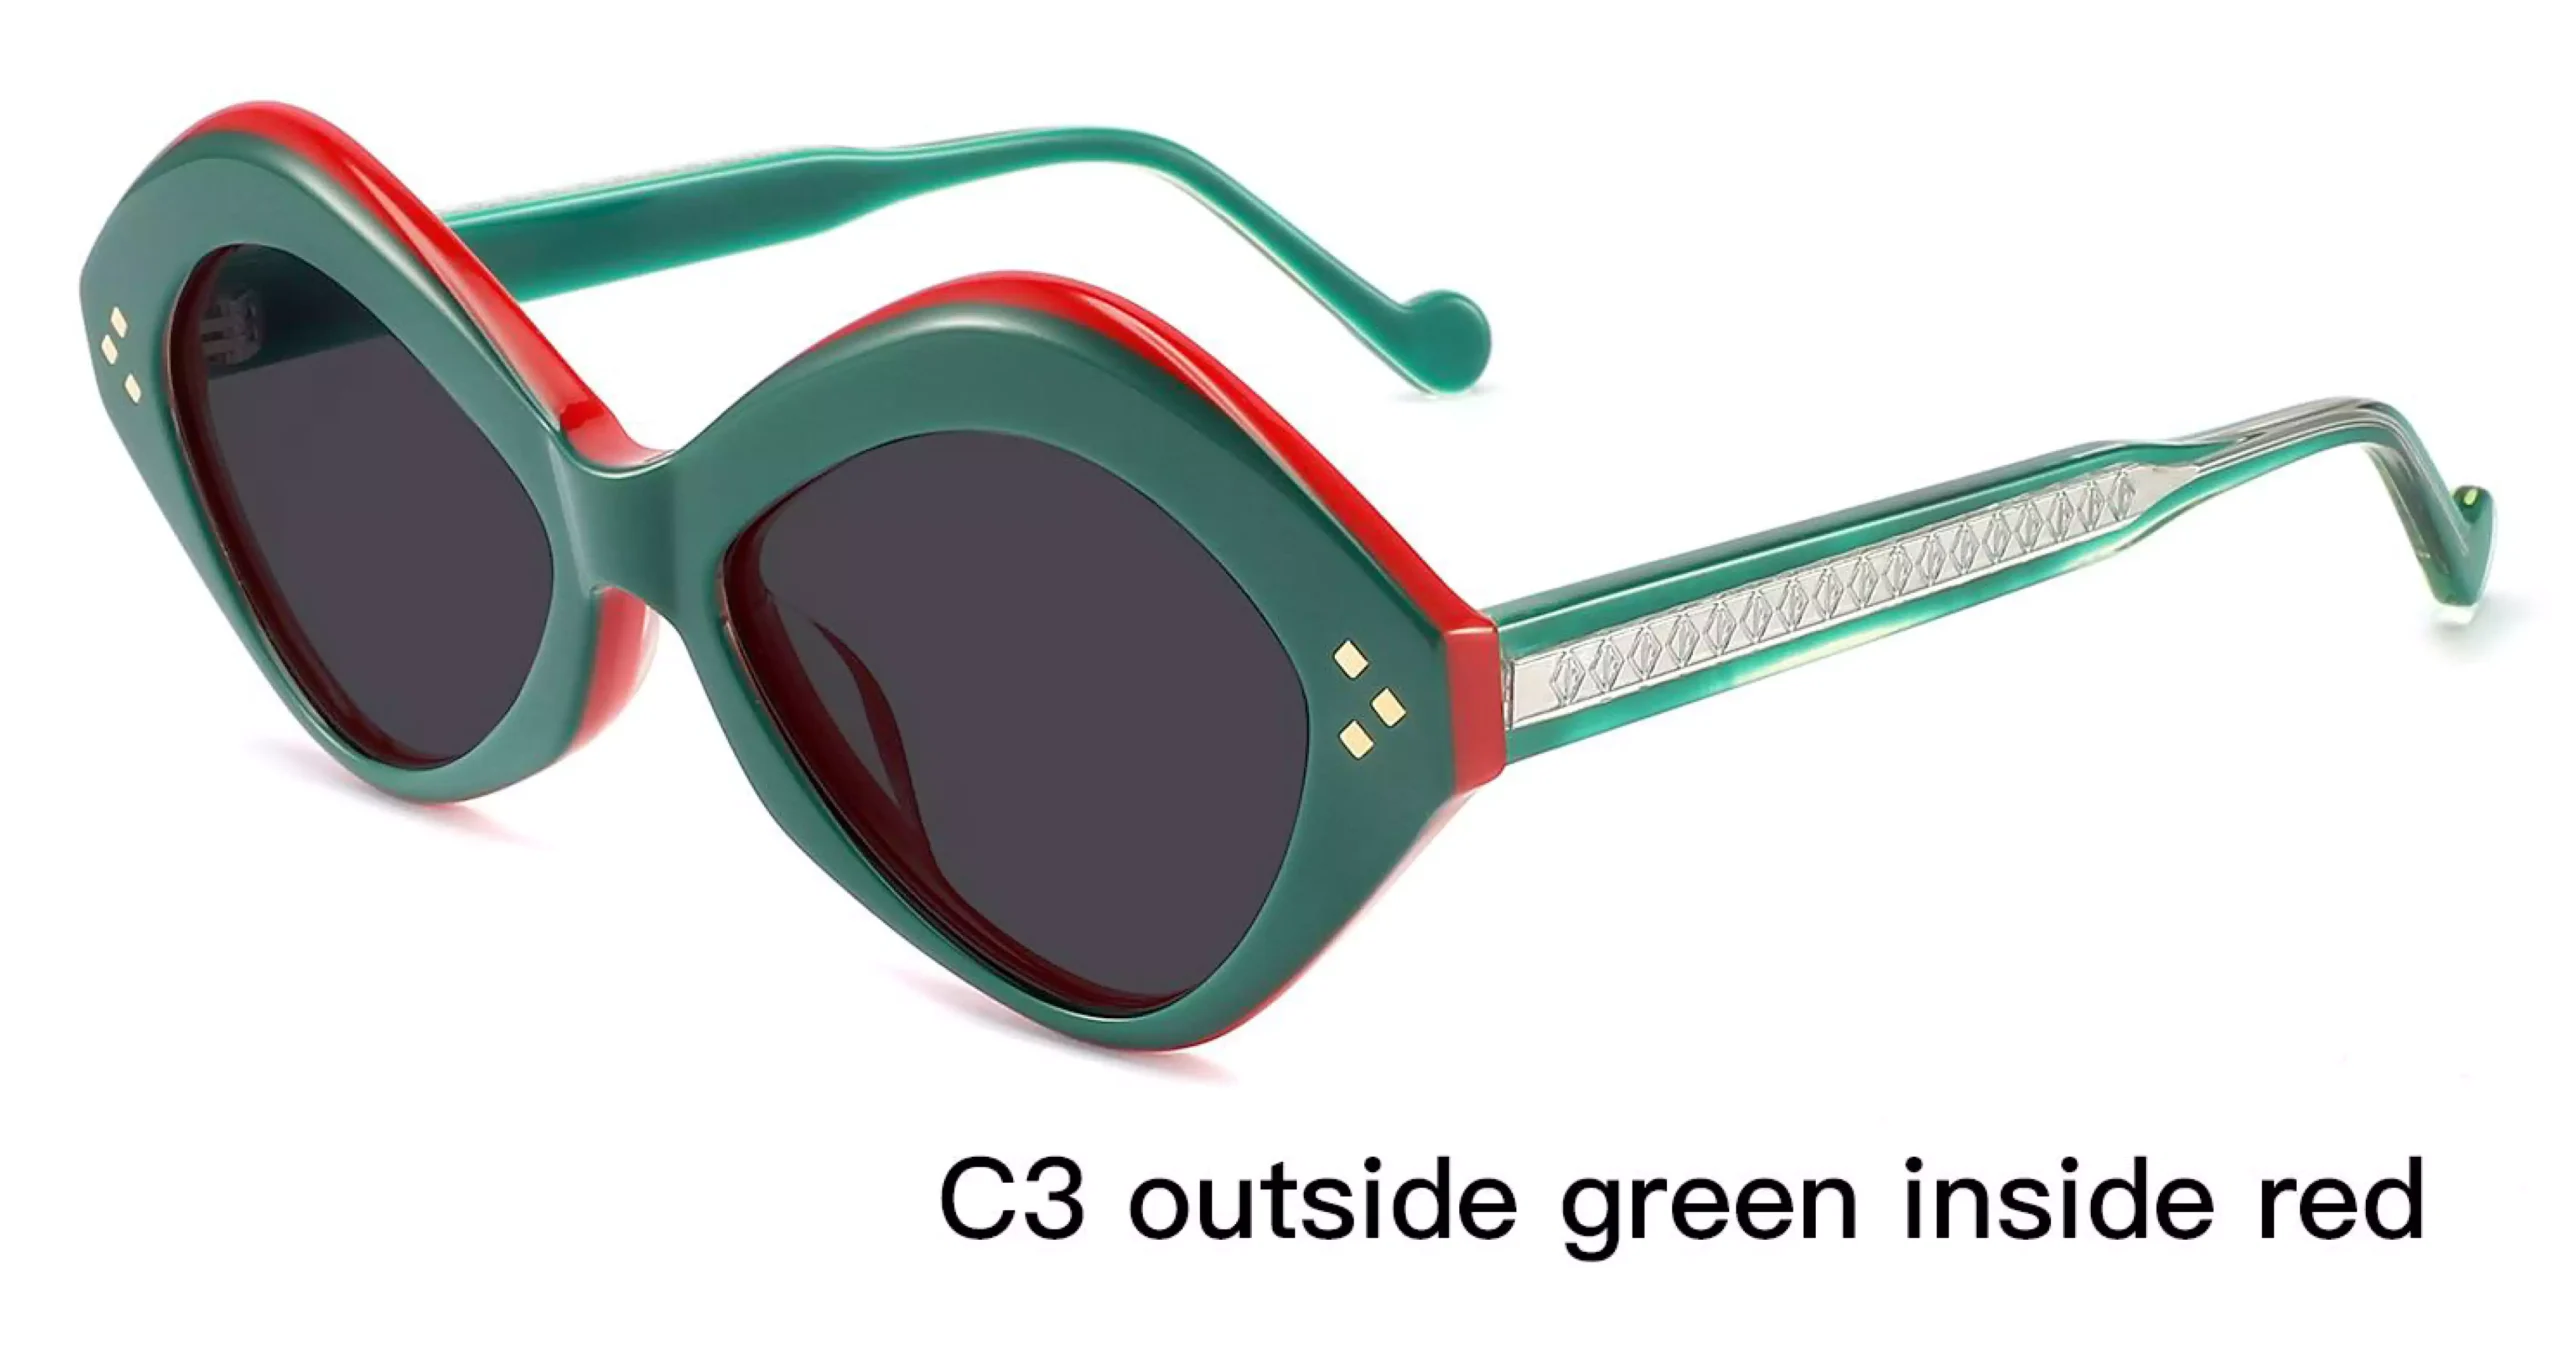 UV Protection Sunglasses Wholesale, Retro, Outside Green, Inside Red, rivets, laser engraved wire cores, acetate sunglasses